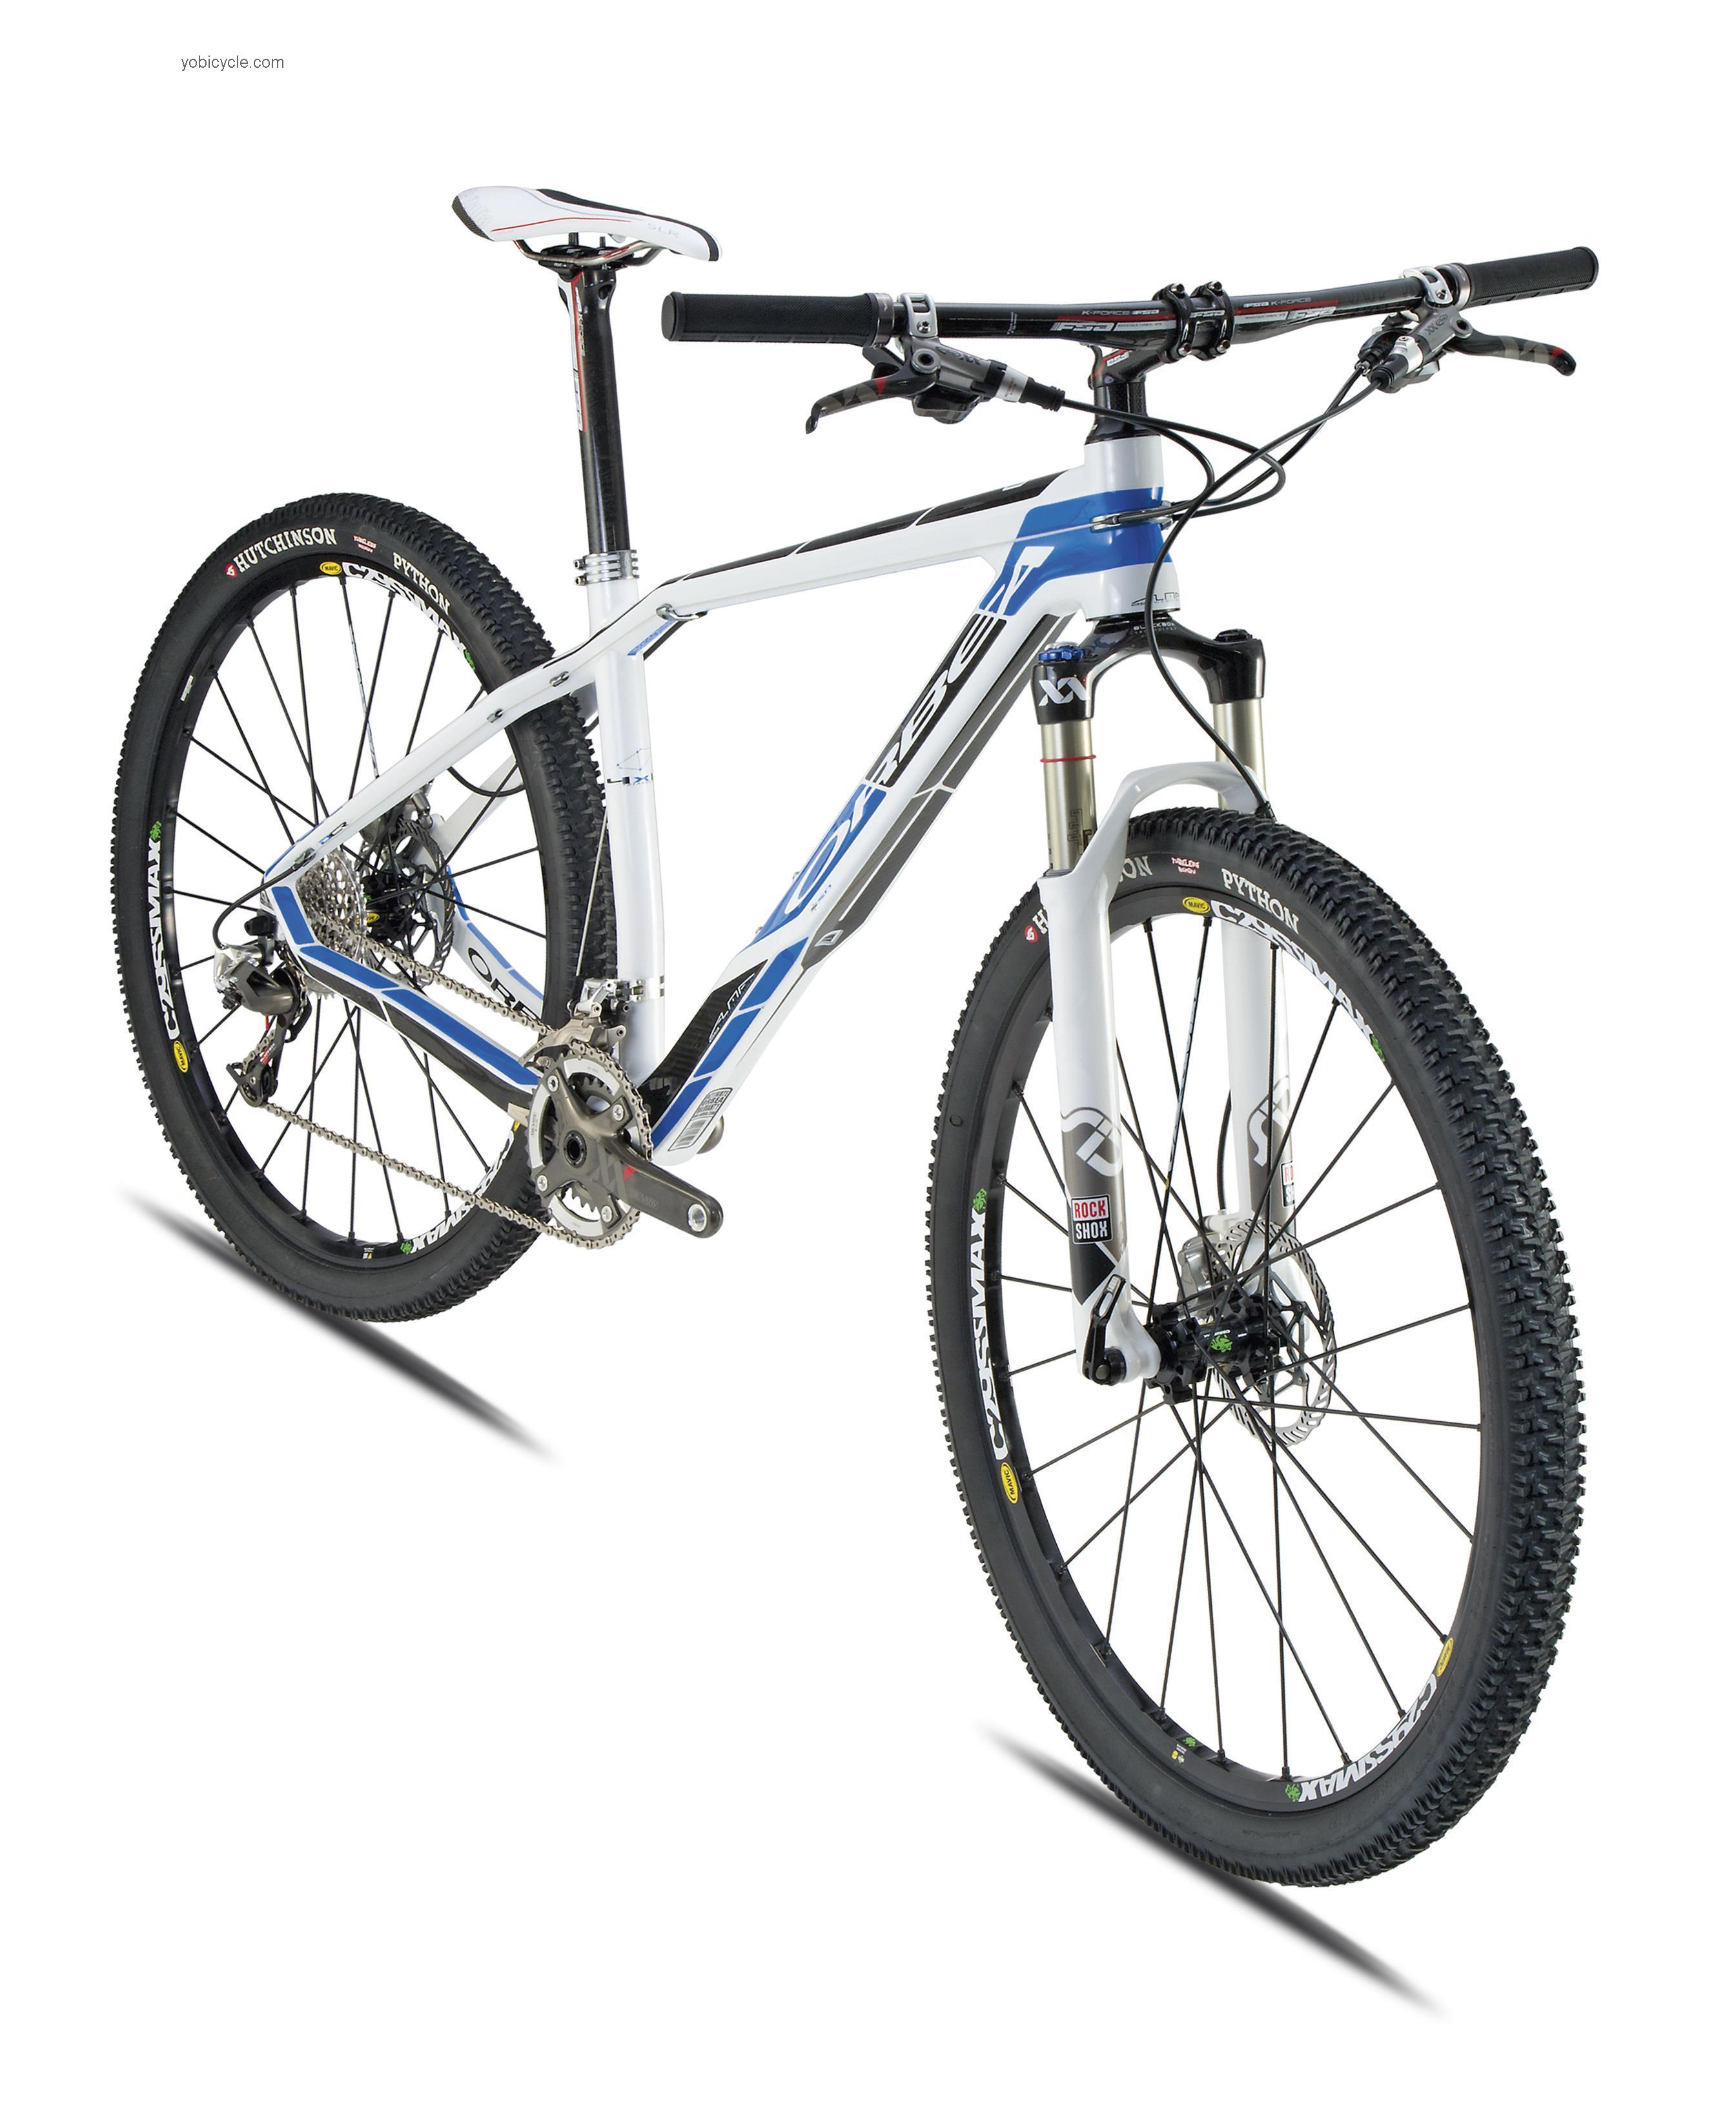 Orbea Alma 29 Silver Team competitors and comparison tool online specs and performance